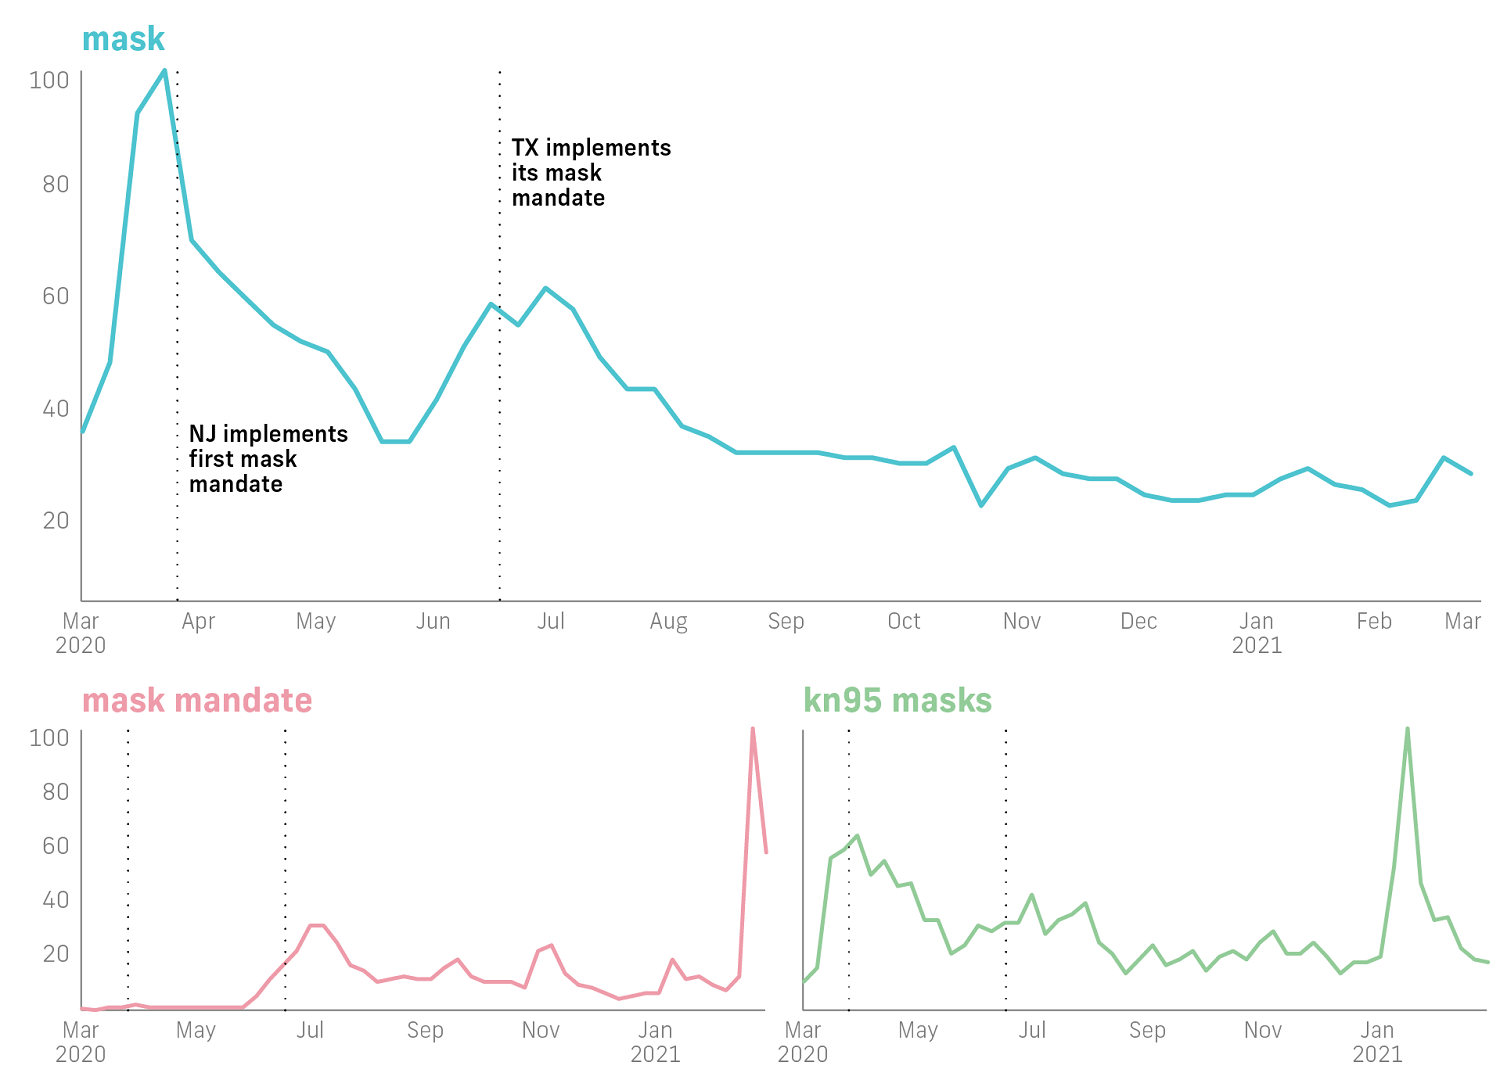 Line graphs in blue, pink, and green for mask, mask mandate, and kn95 masks